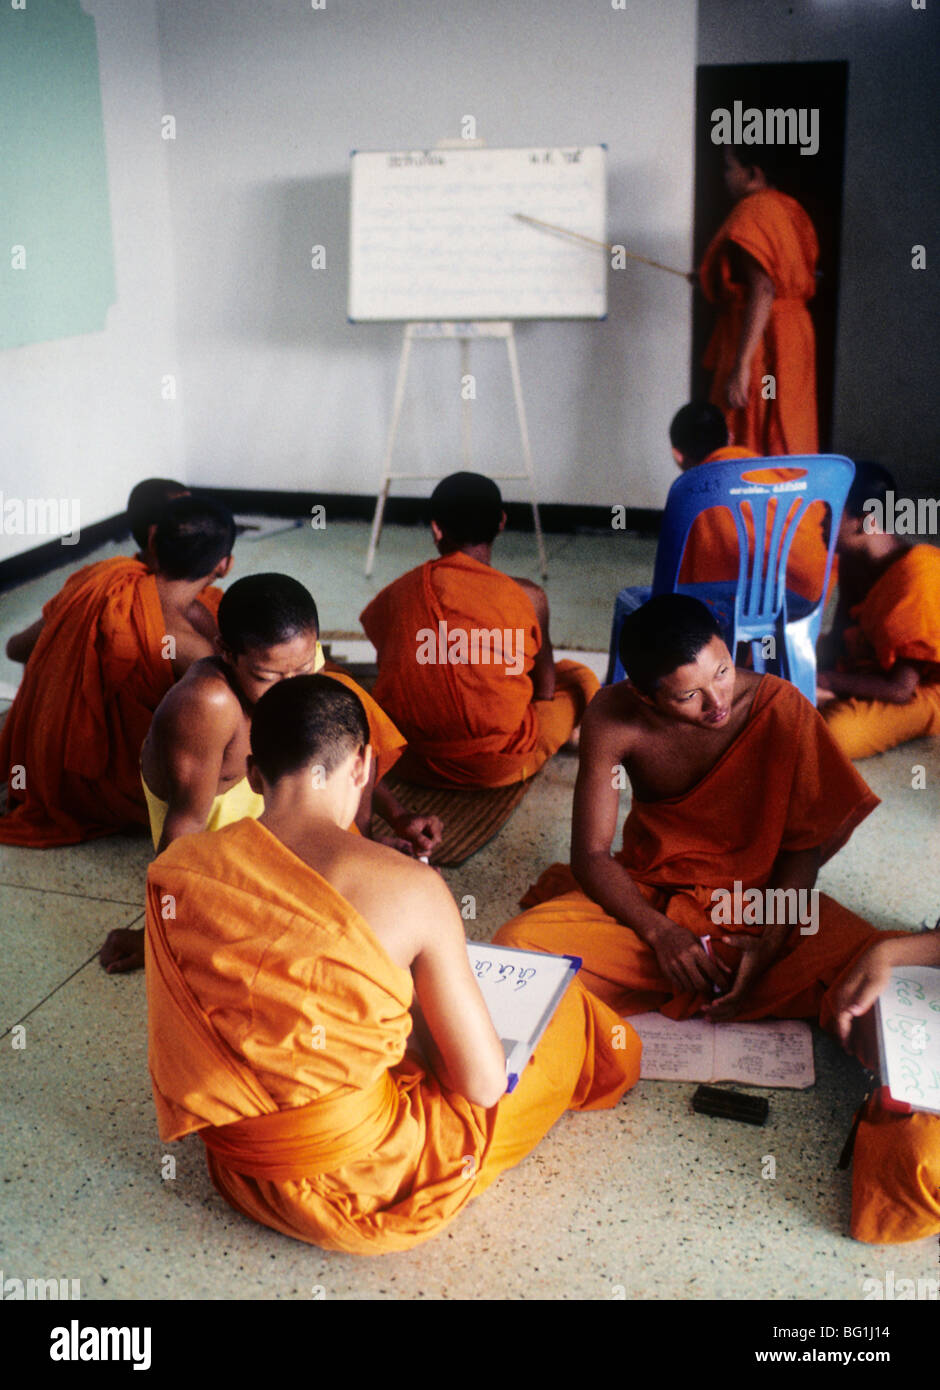 A Buddhist monk teaches the Buddhist principles to a class of young monk students in Chaing Rai, Thailand Stock Photo